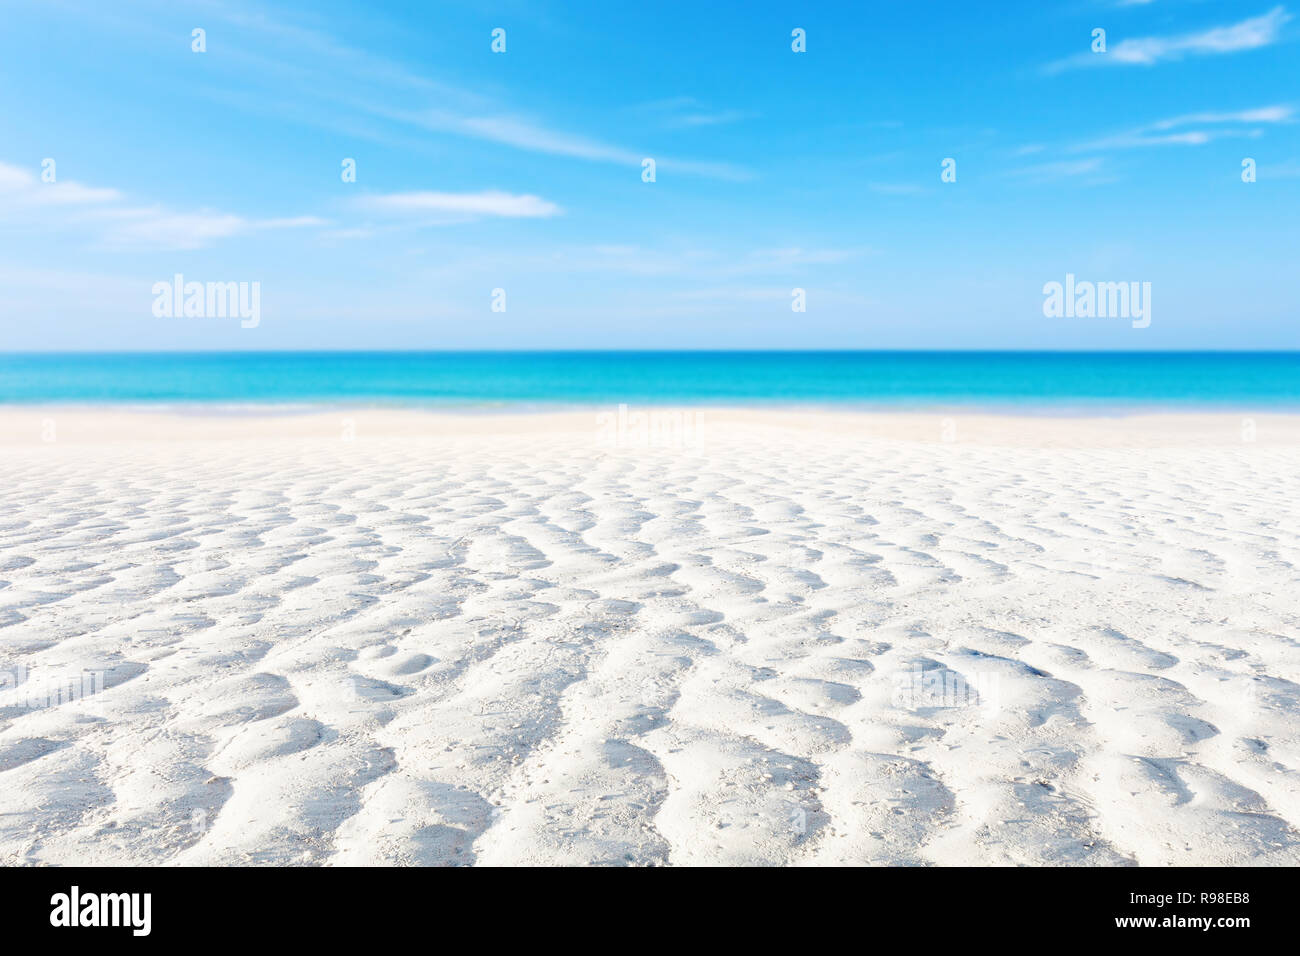 White sand curve or tropical sandy beach with blurry blue ocean and blue sky background image for nature background or summer background. Stock Photo